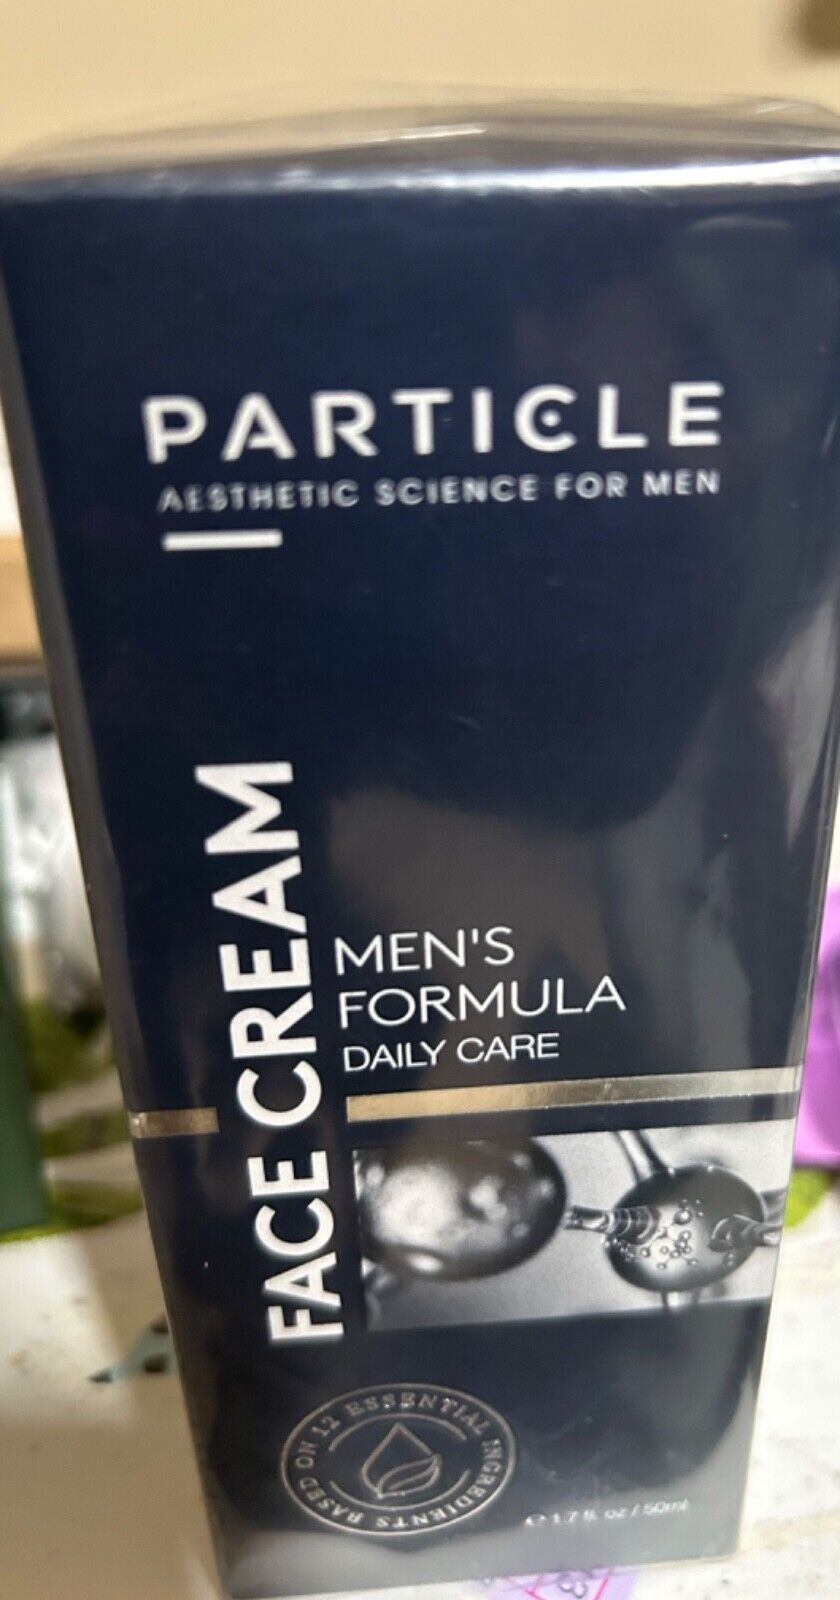 Particle Face Cream Men's Formula Daily Care 1.7 oz / 50 ml - New / Sealed